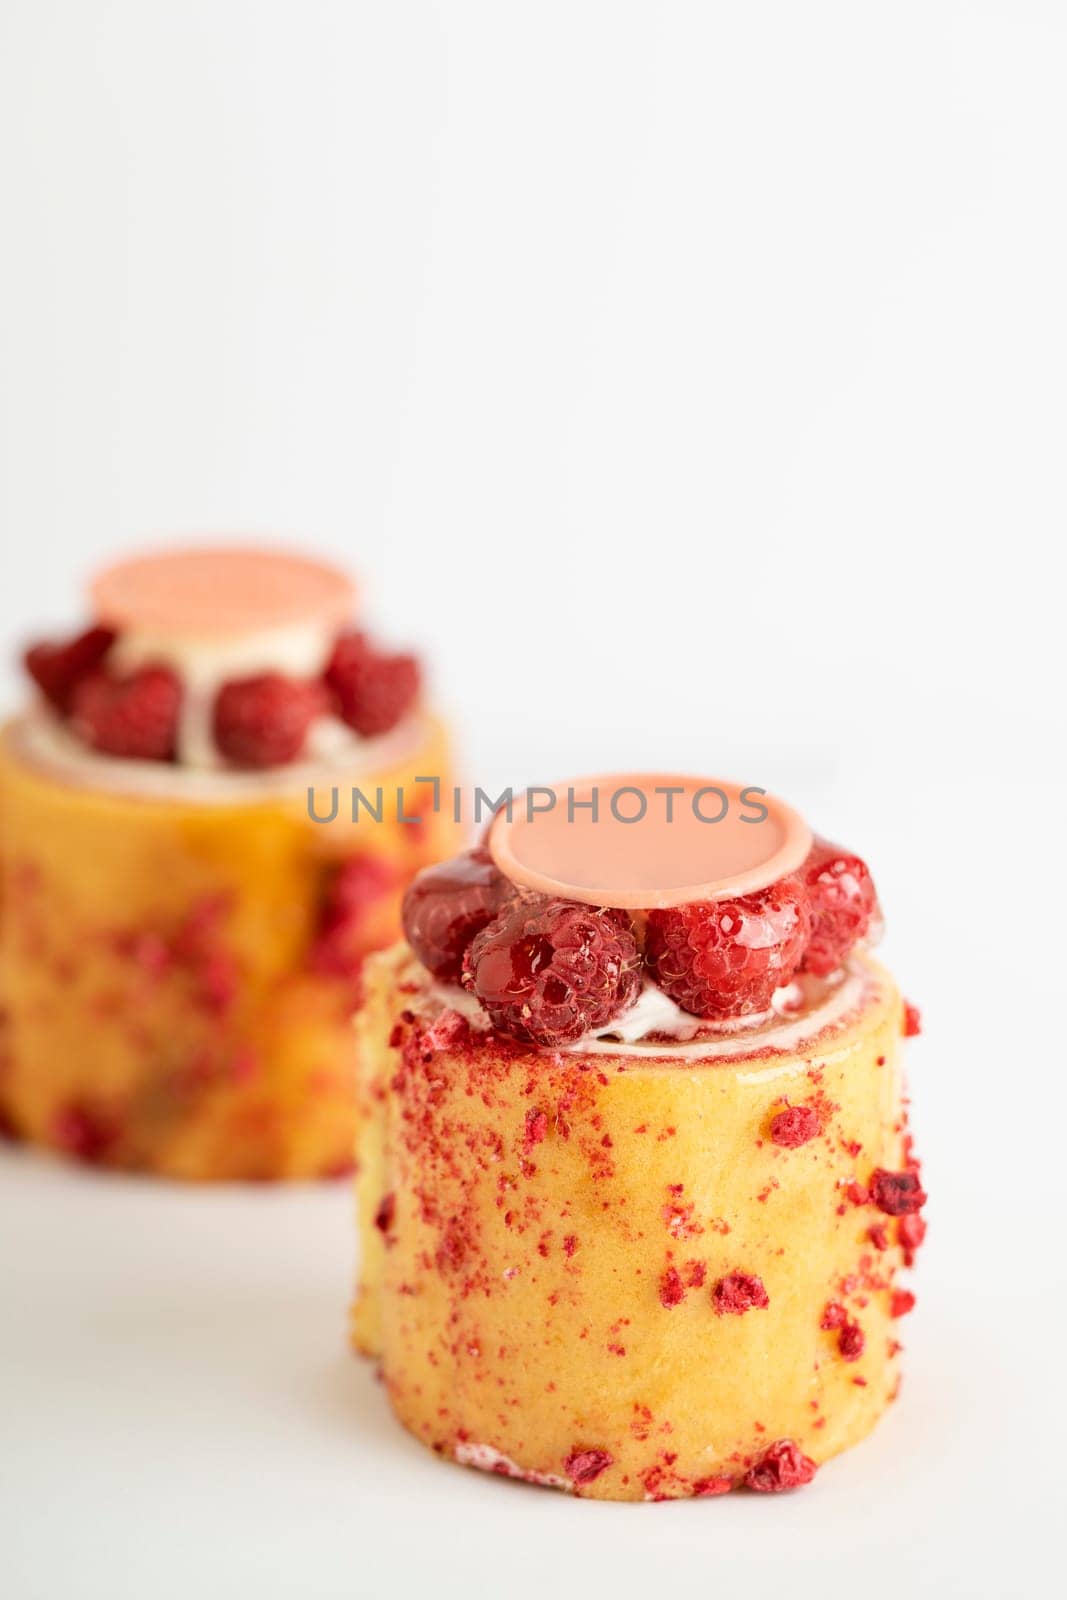 A delicious dessert of raspberry pudding topped with luscious cream and a sweet drizzle